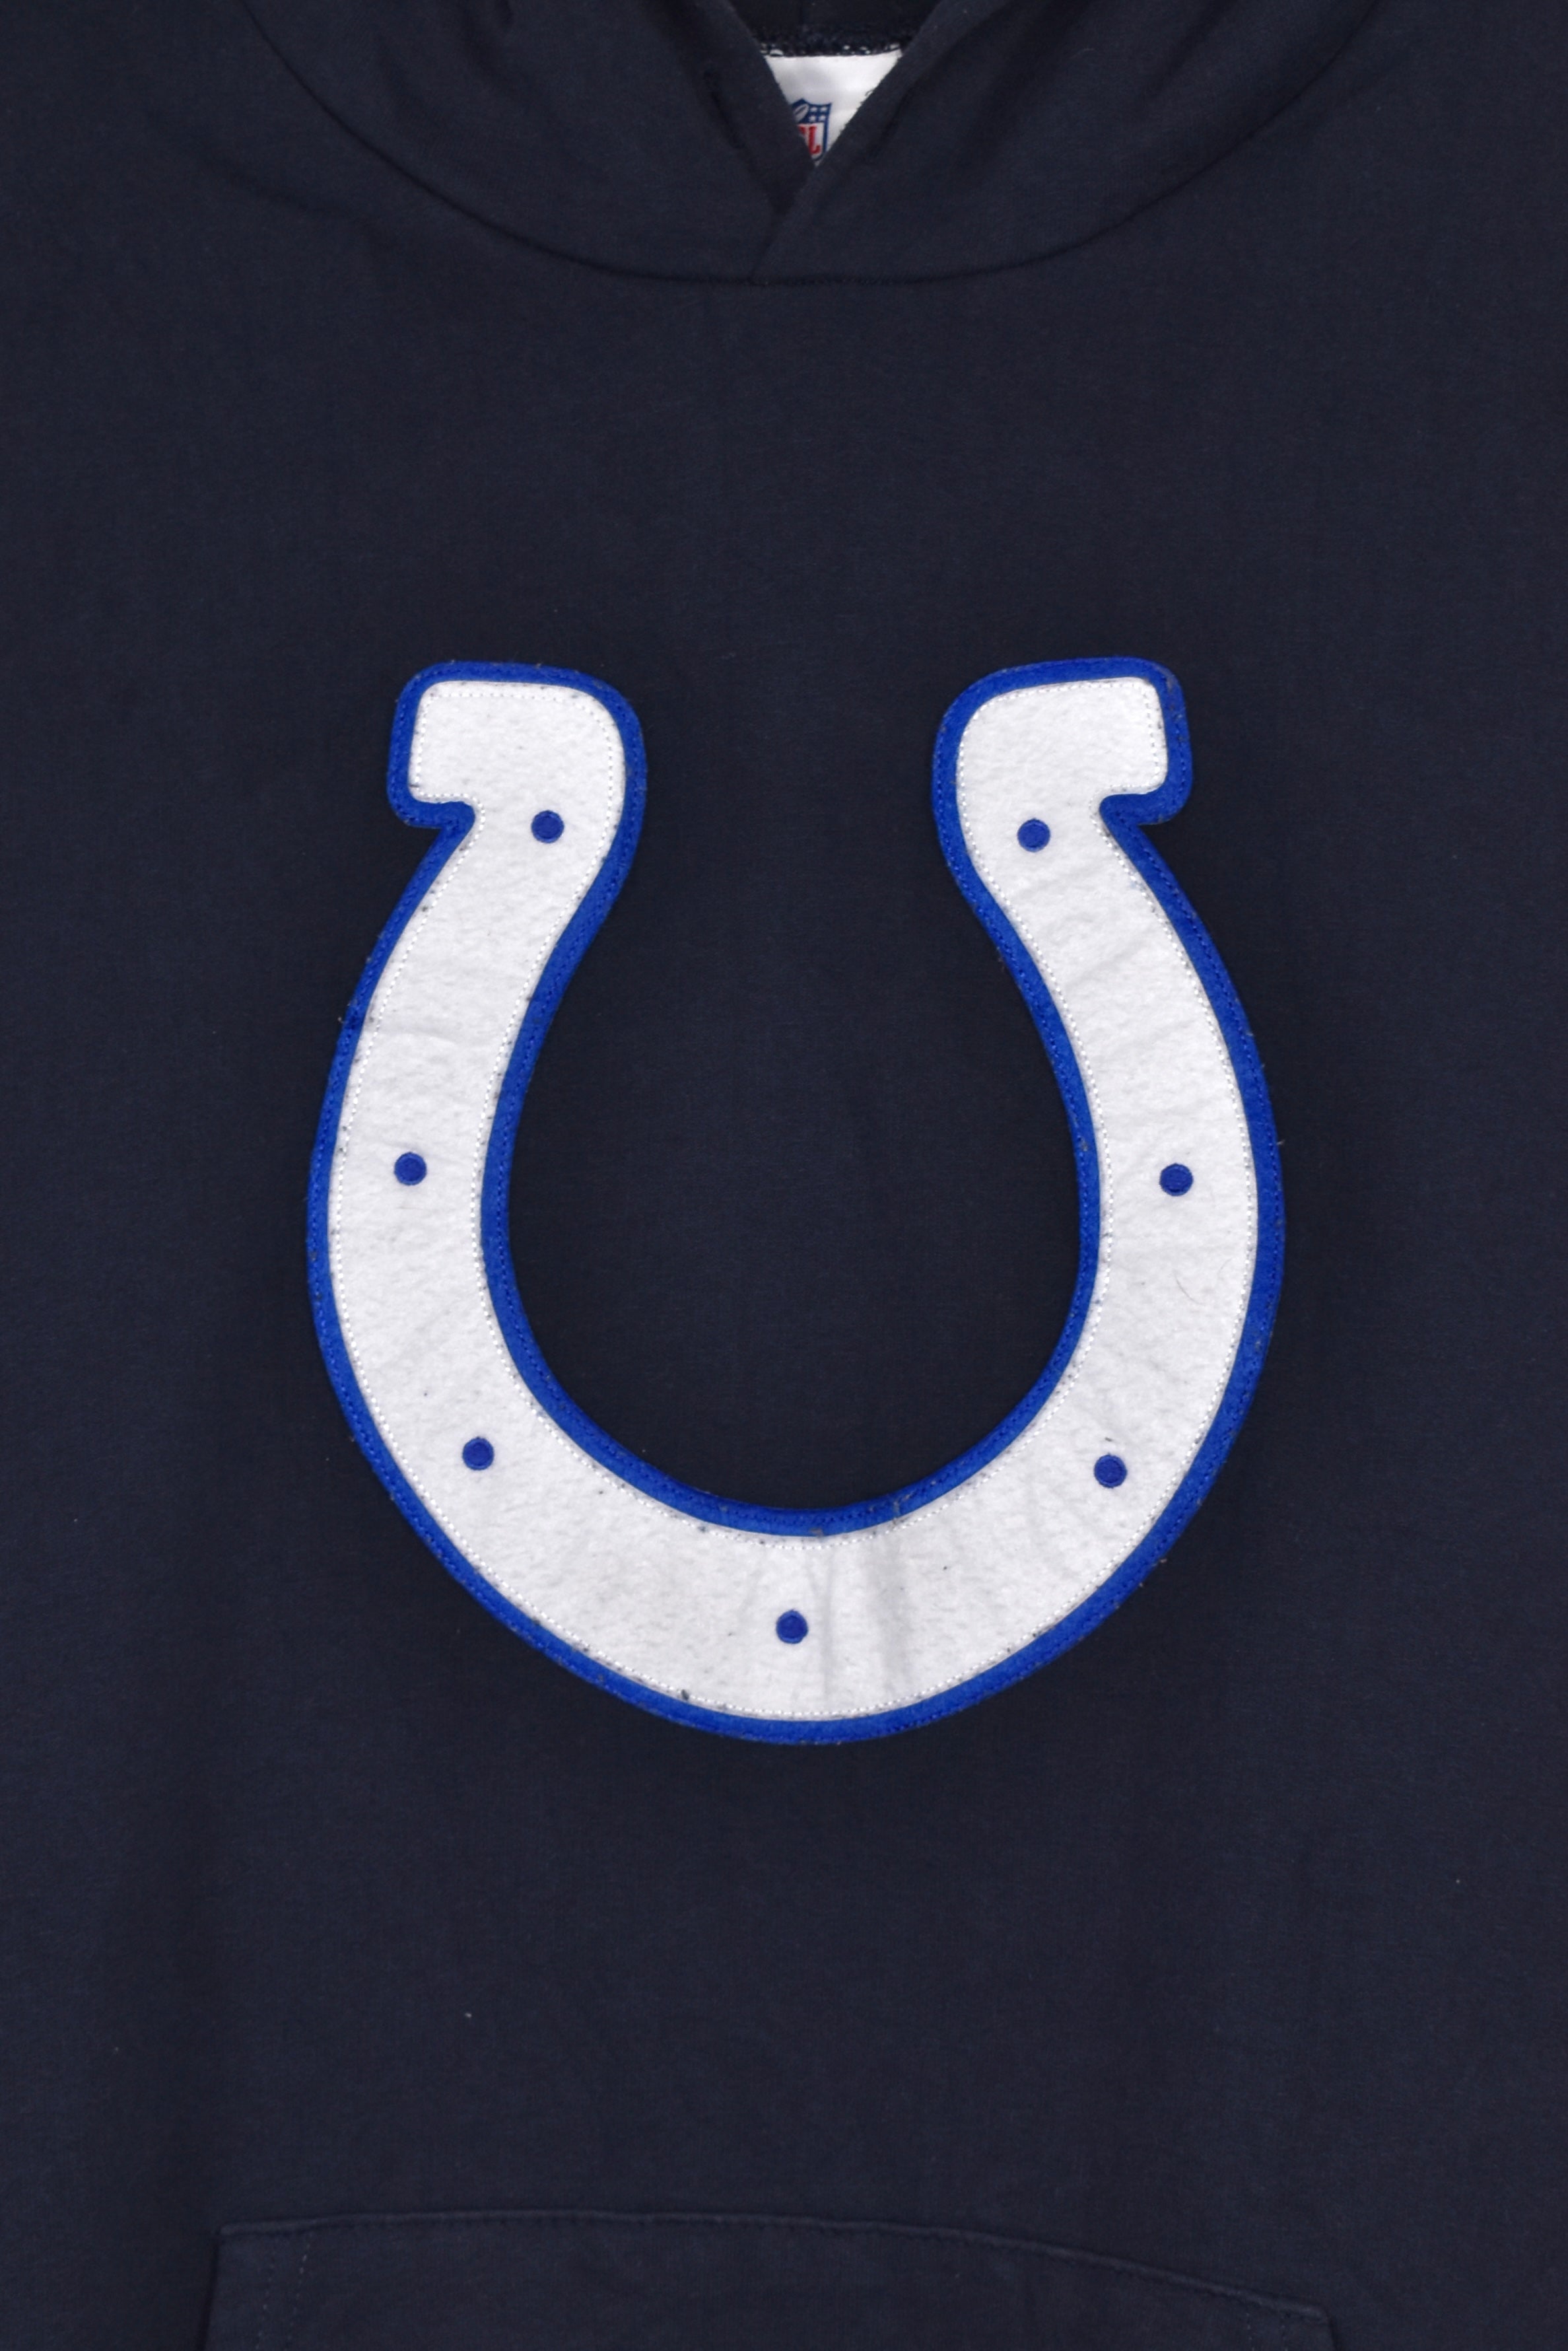 Vintage Indianapolis Colts hoodie (2XL), navy NFL embroidered sweatshirt